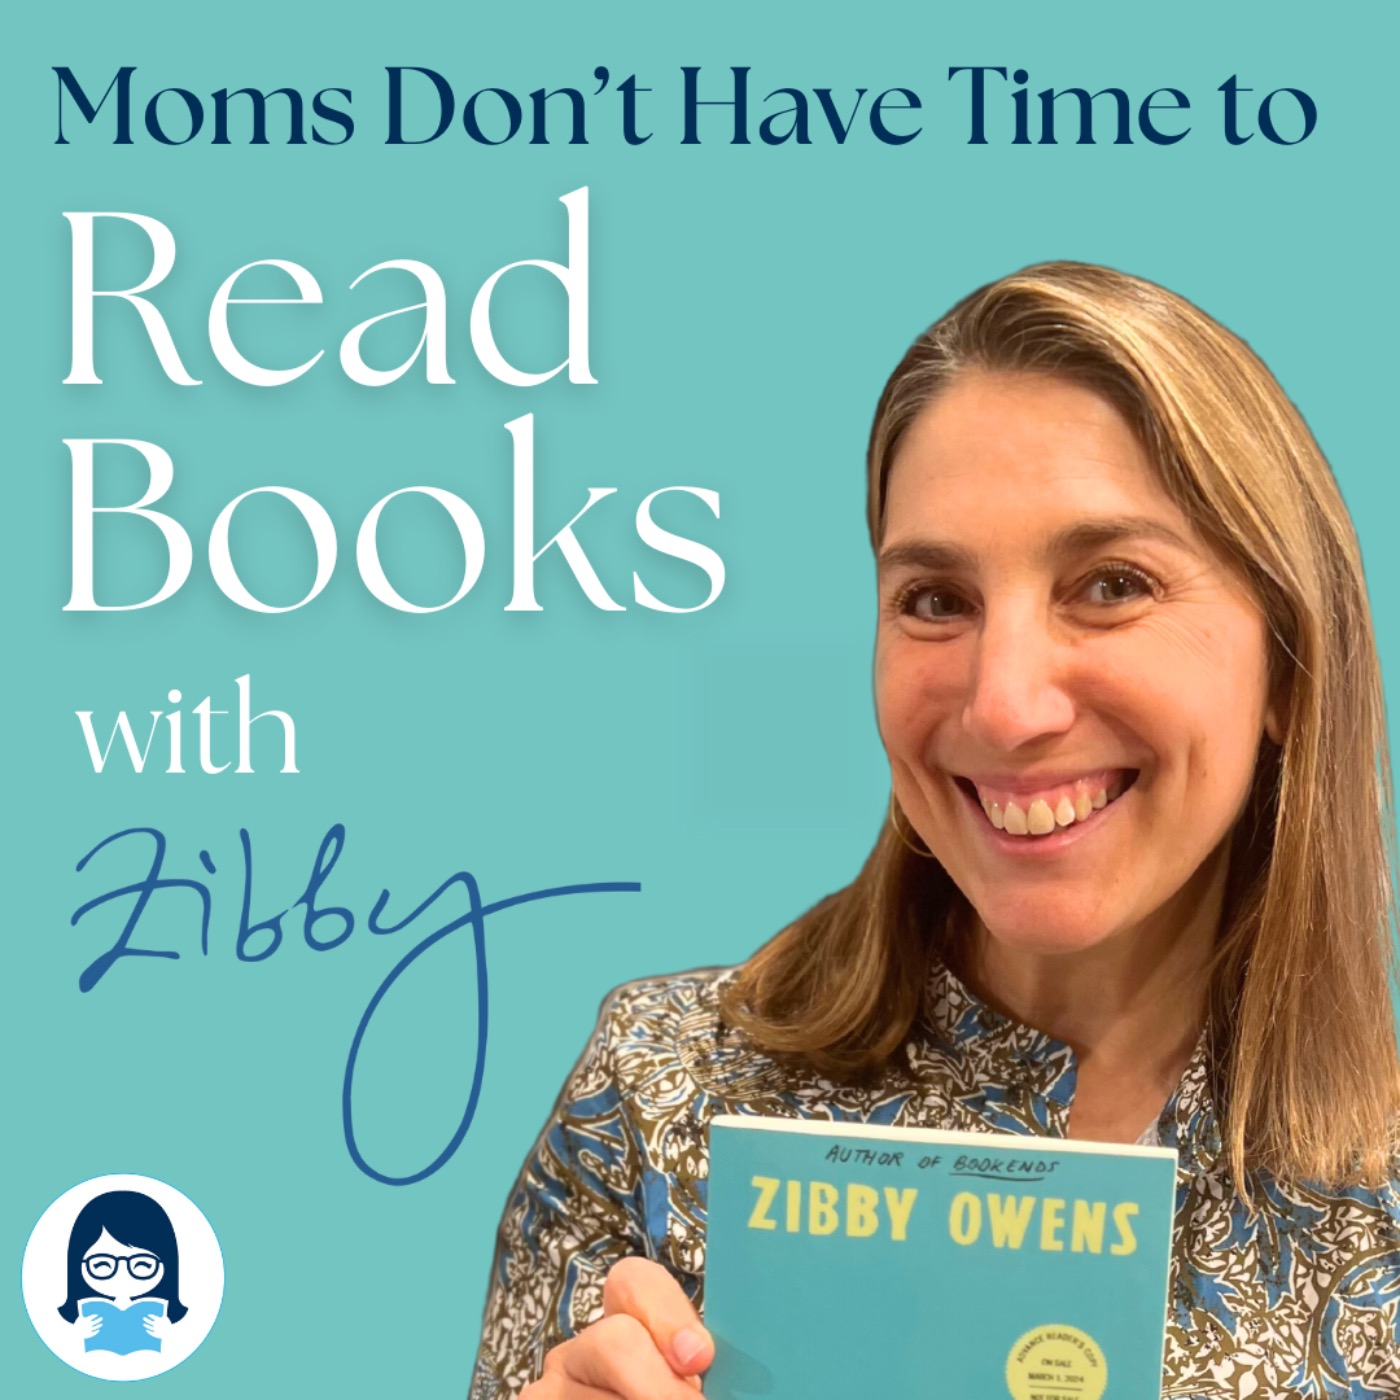 Moms Don’t Have Time to Read Books with Zibby